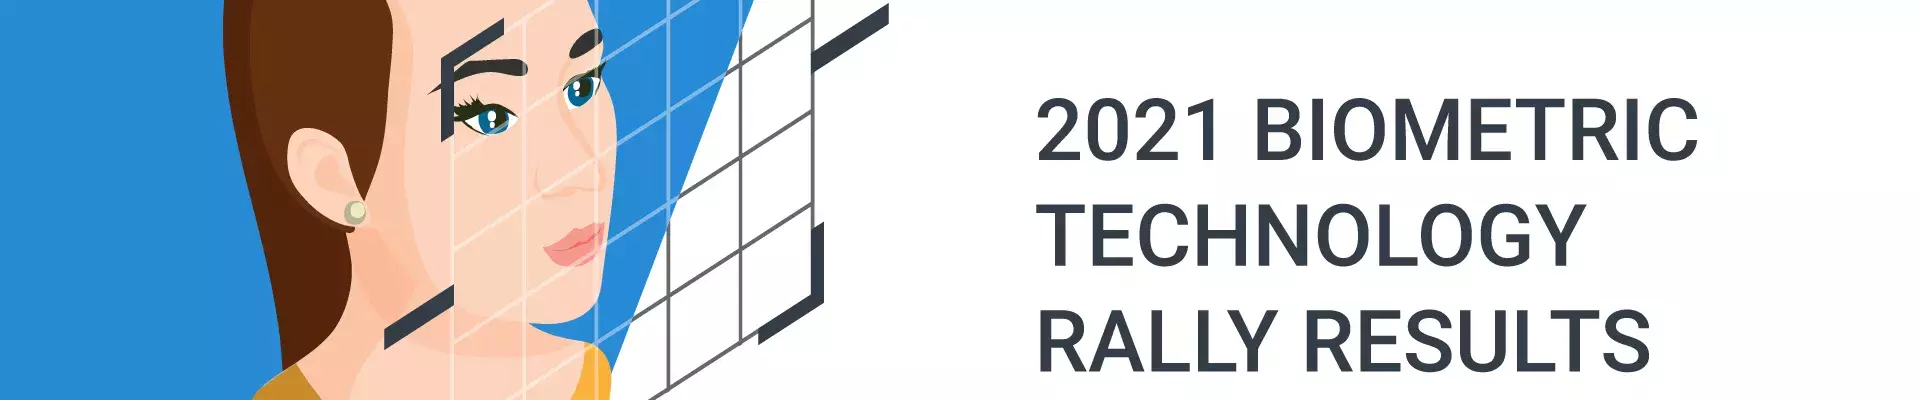 2021 Biometric technology Rally Results 